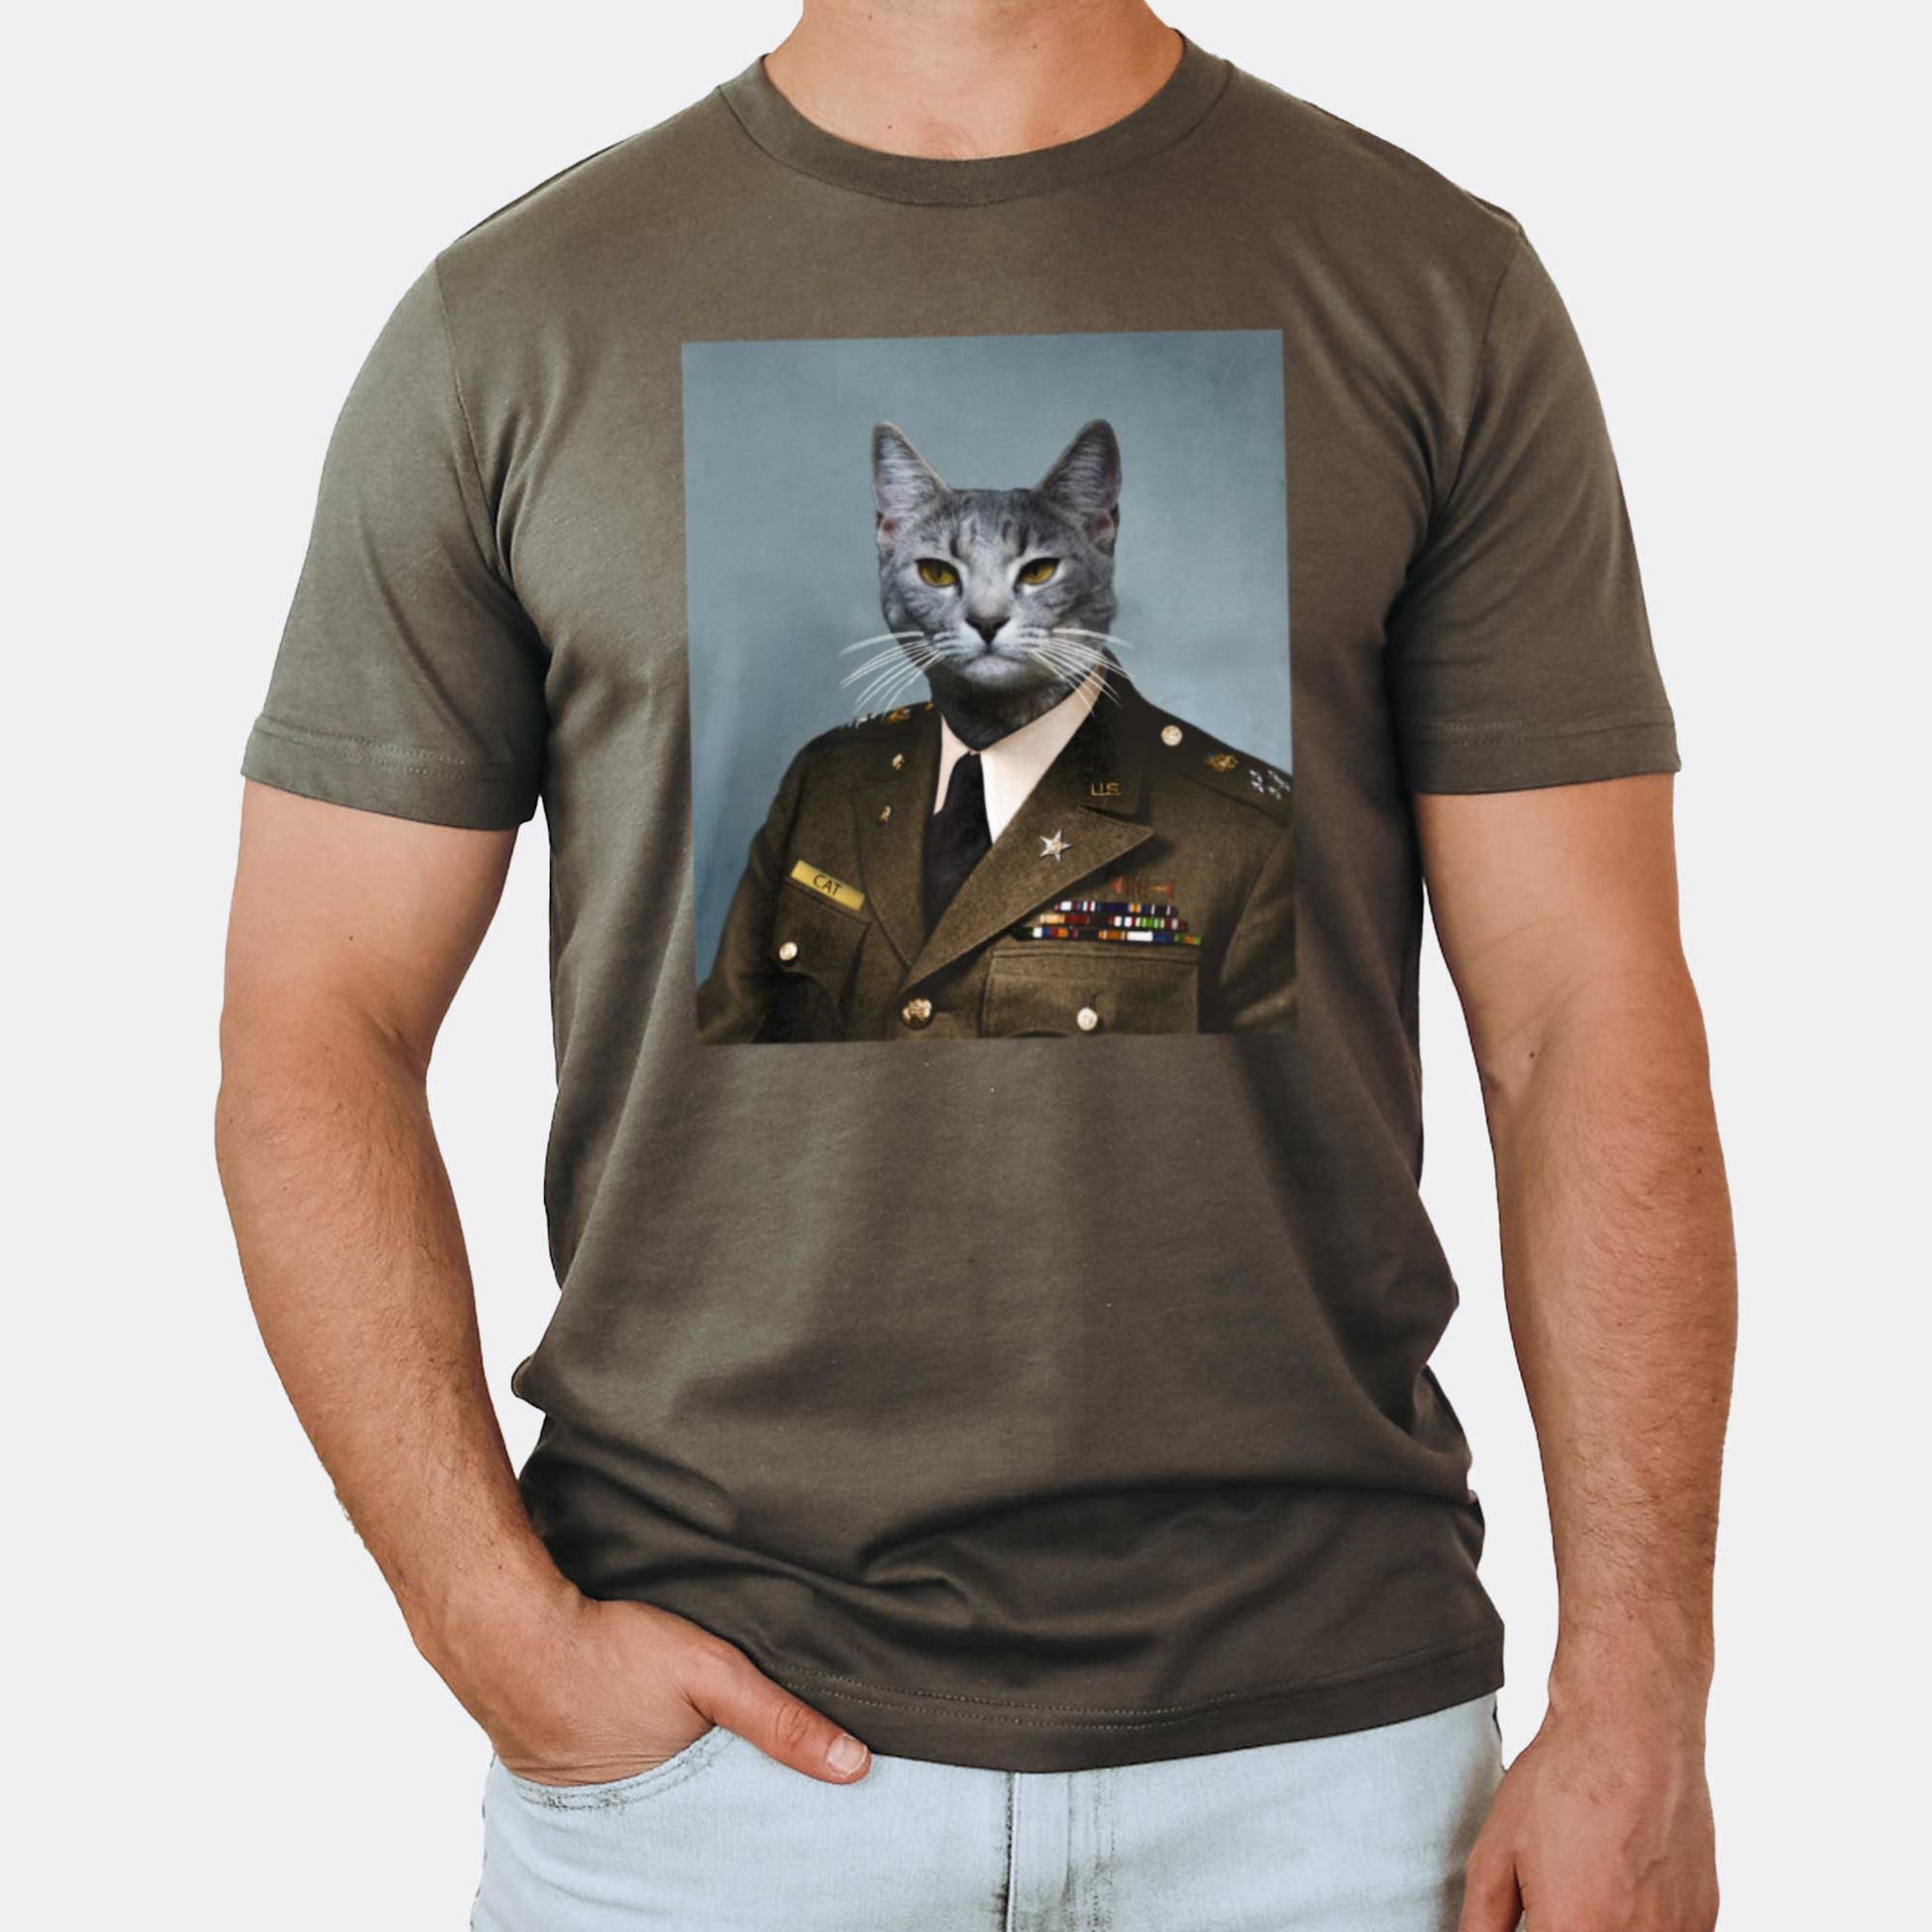 A man wearing an army green Bella Canvas t-shirt with a portrait of a grey cat as a U.S. army general.